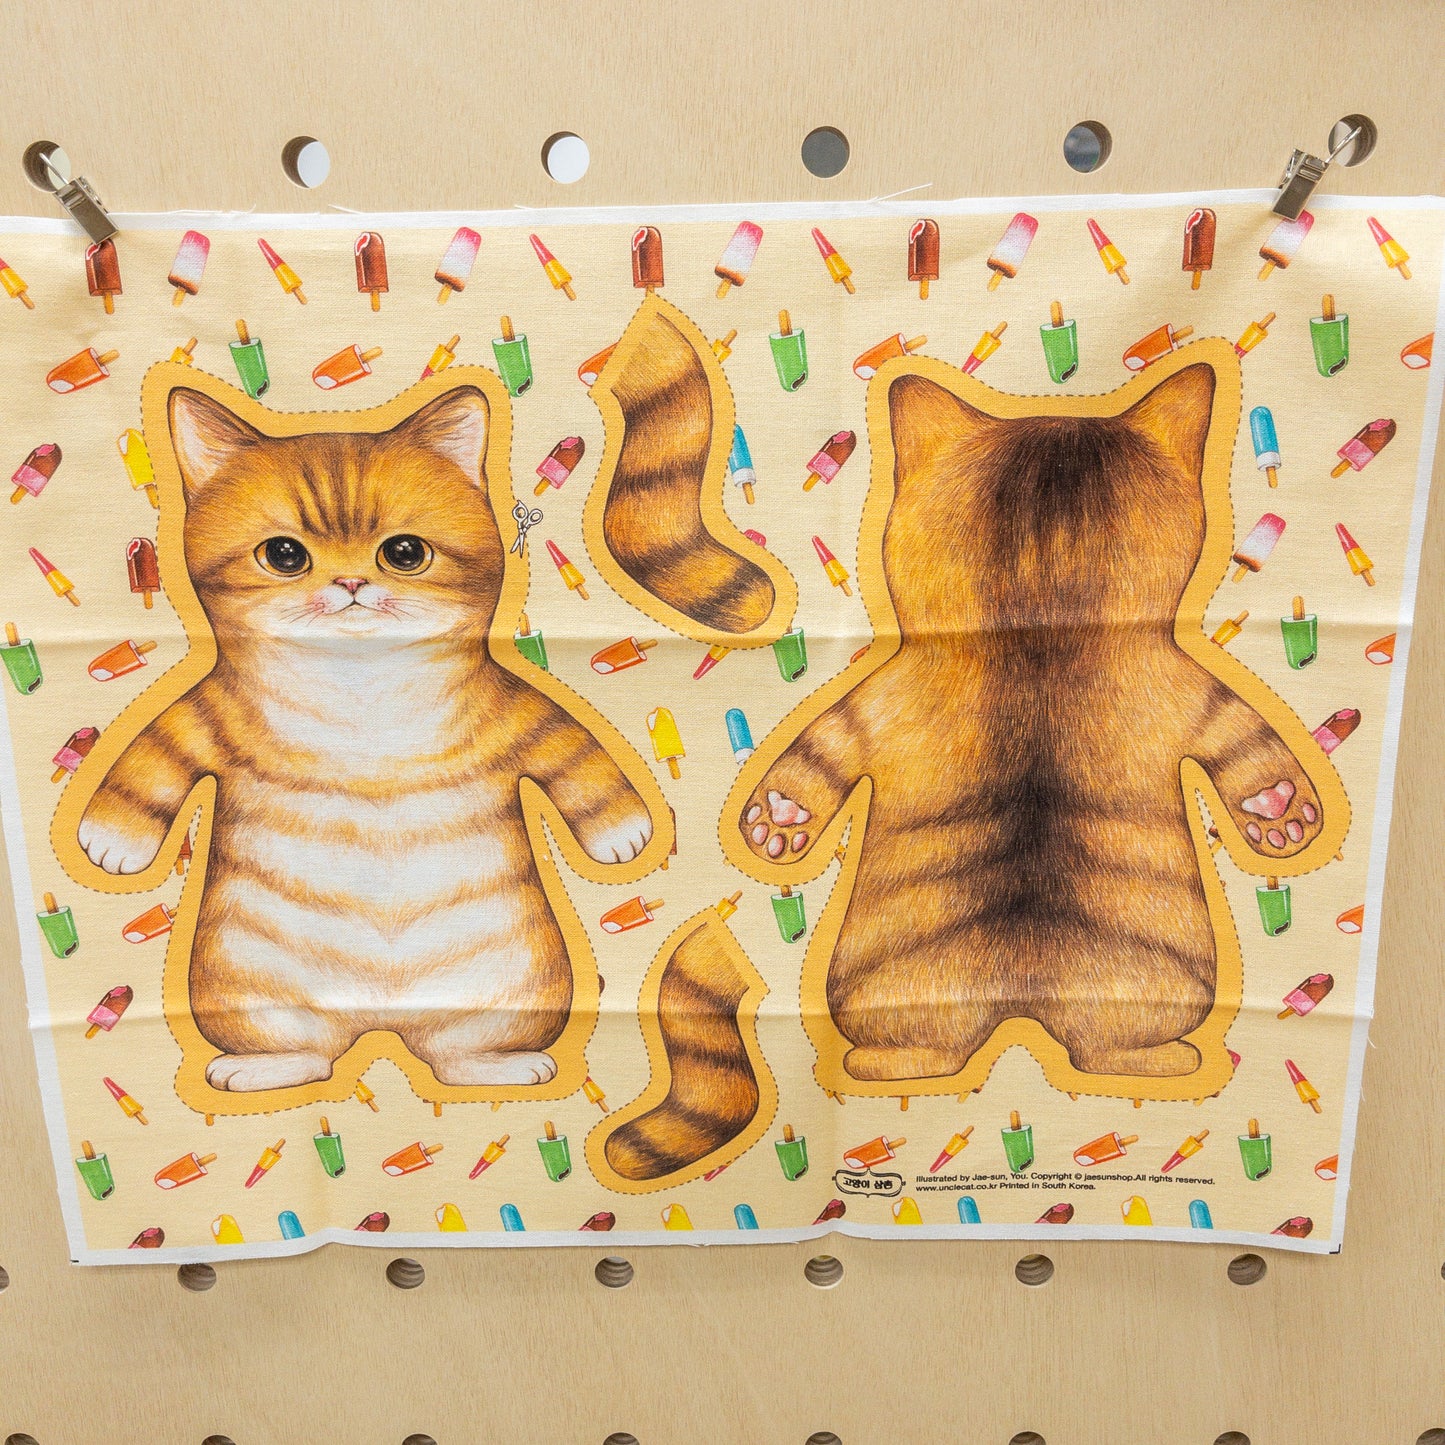 preorder預購 - Unclecat 貓叔叔 | diy fabric for making cat doll "Coin" | cotton linen 棉麻